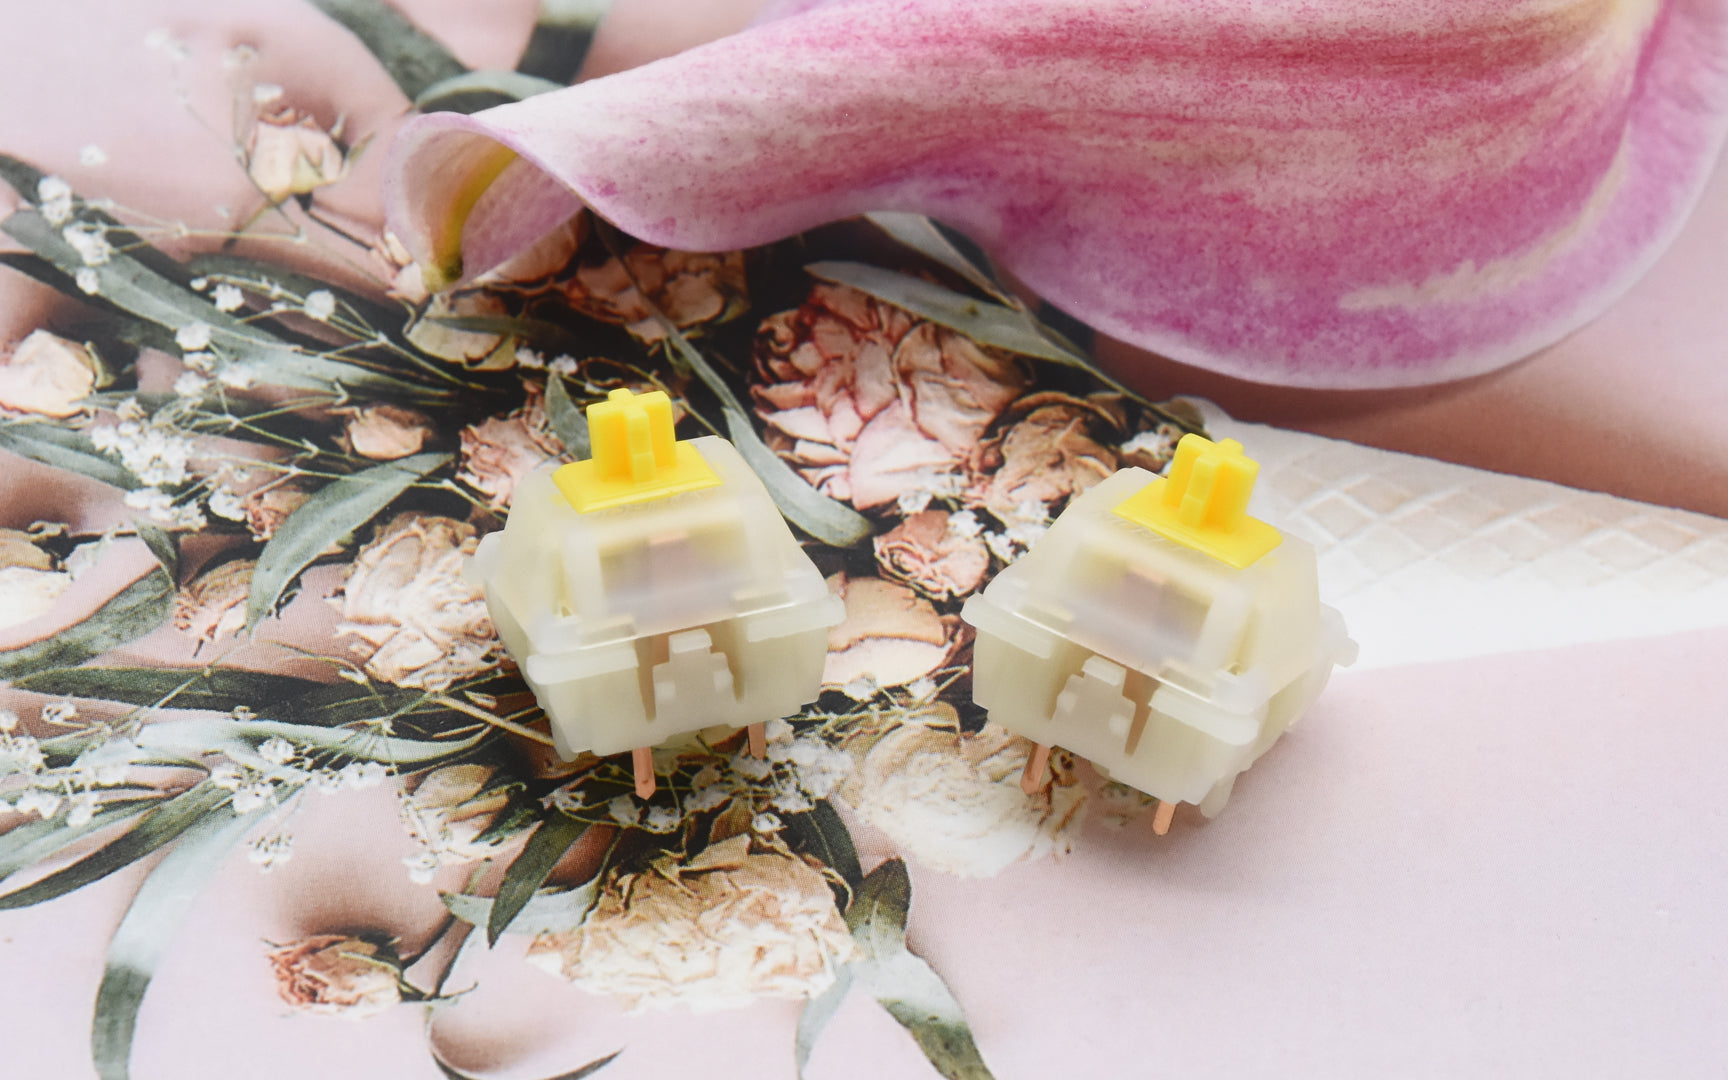 GATERON CAP MILKY YELLOW V2 LINEAR SWITCH FACTORY LUBED (10PCS)